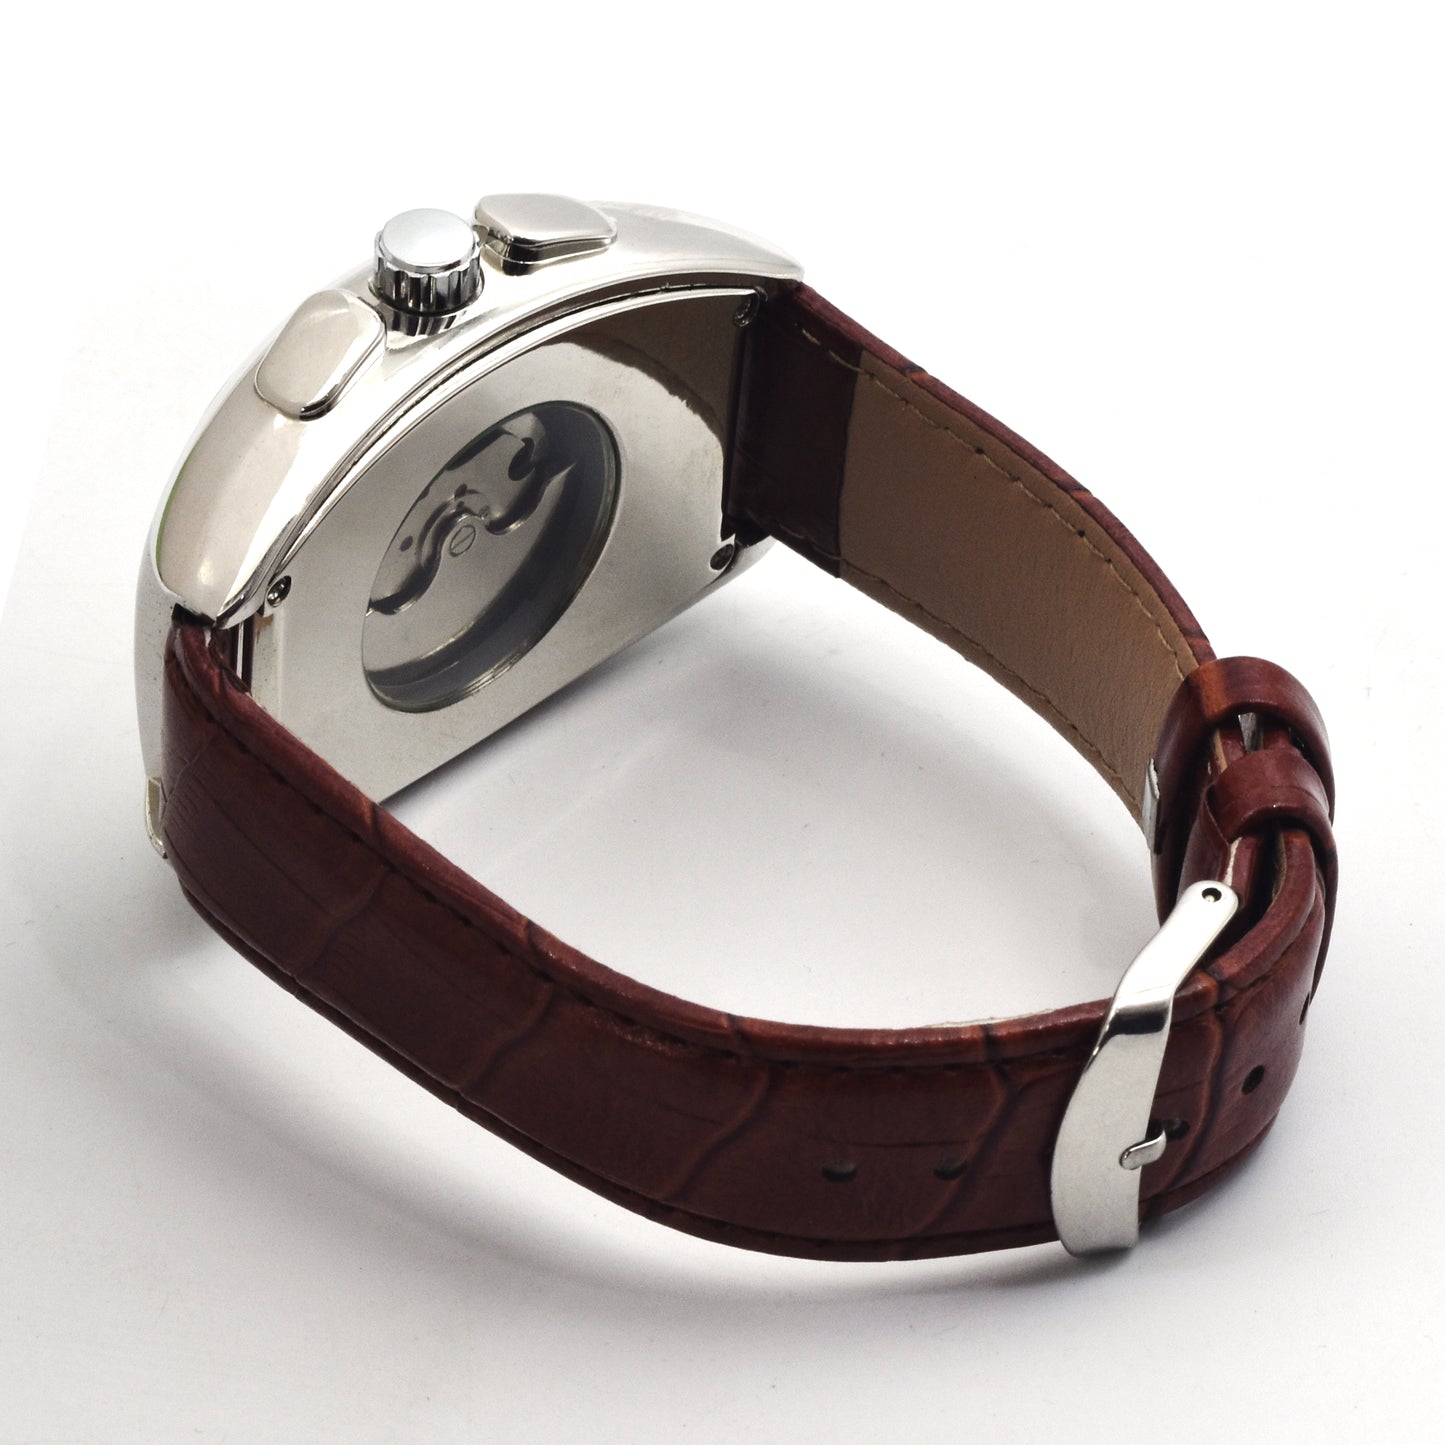 Automatic Mechanical Watch | Sewor Watch 01 Brown Silver